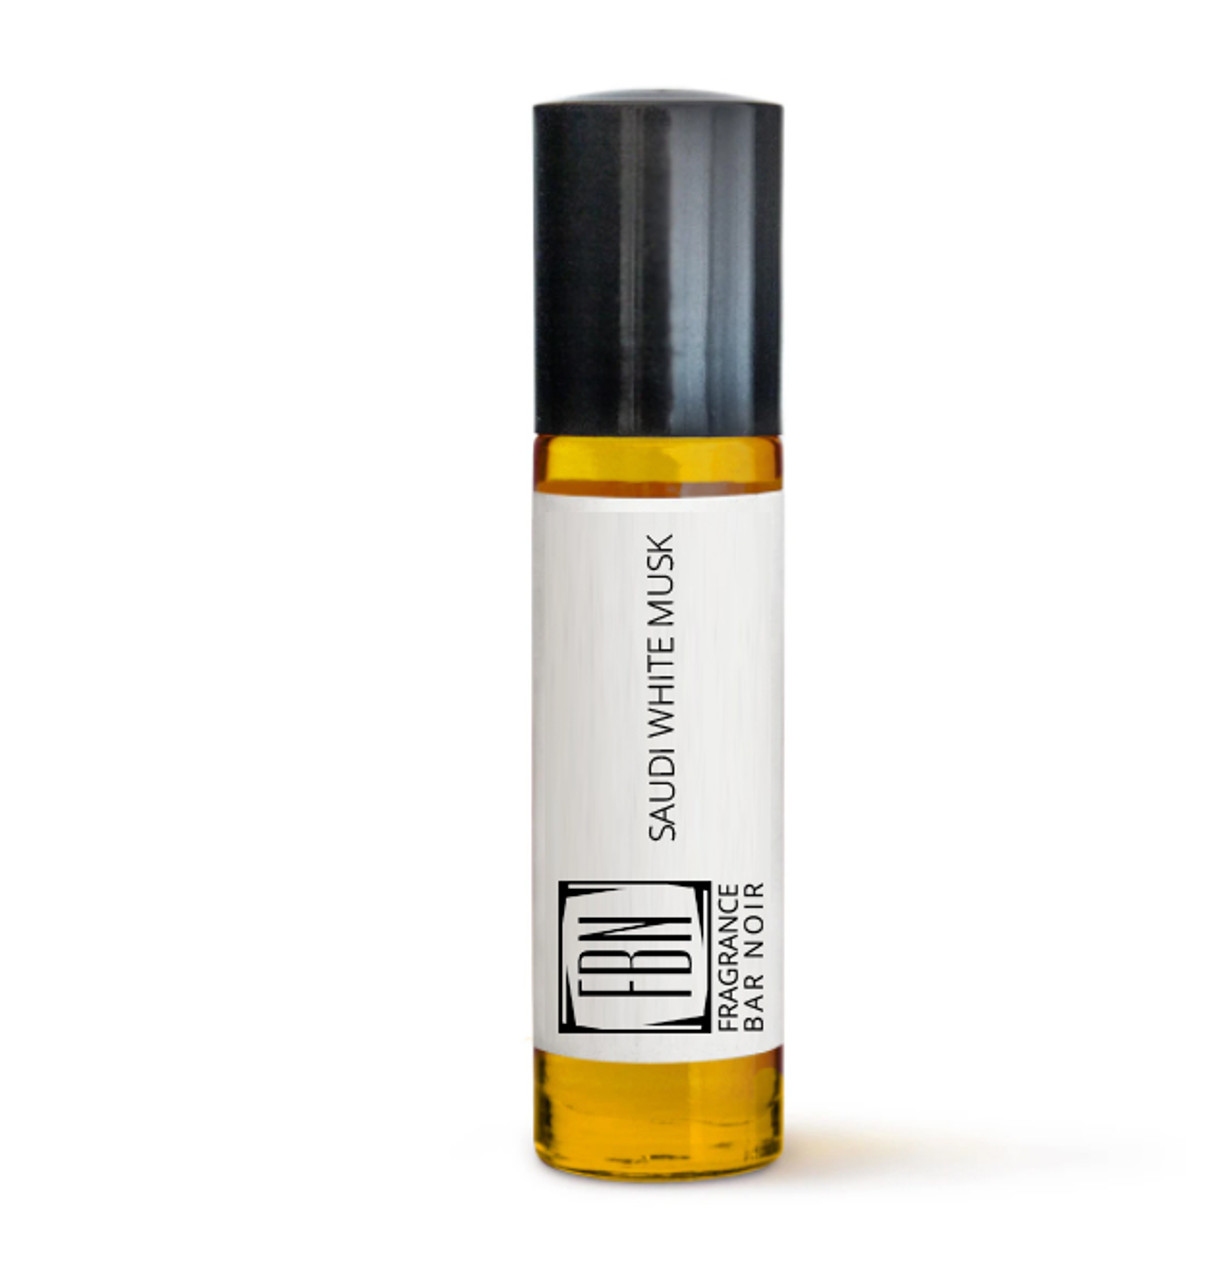  Concentrated Fragrance Oil - Scent - Vanilla Musk: an